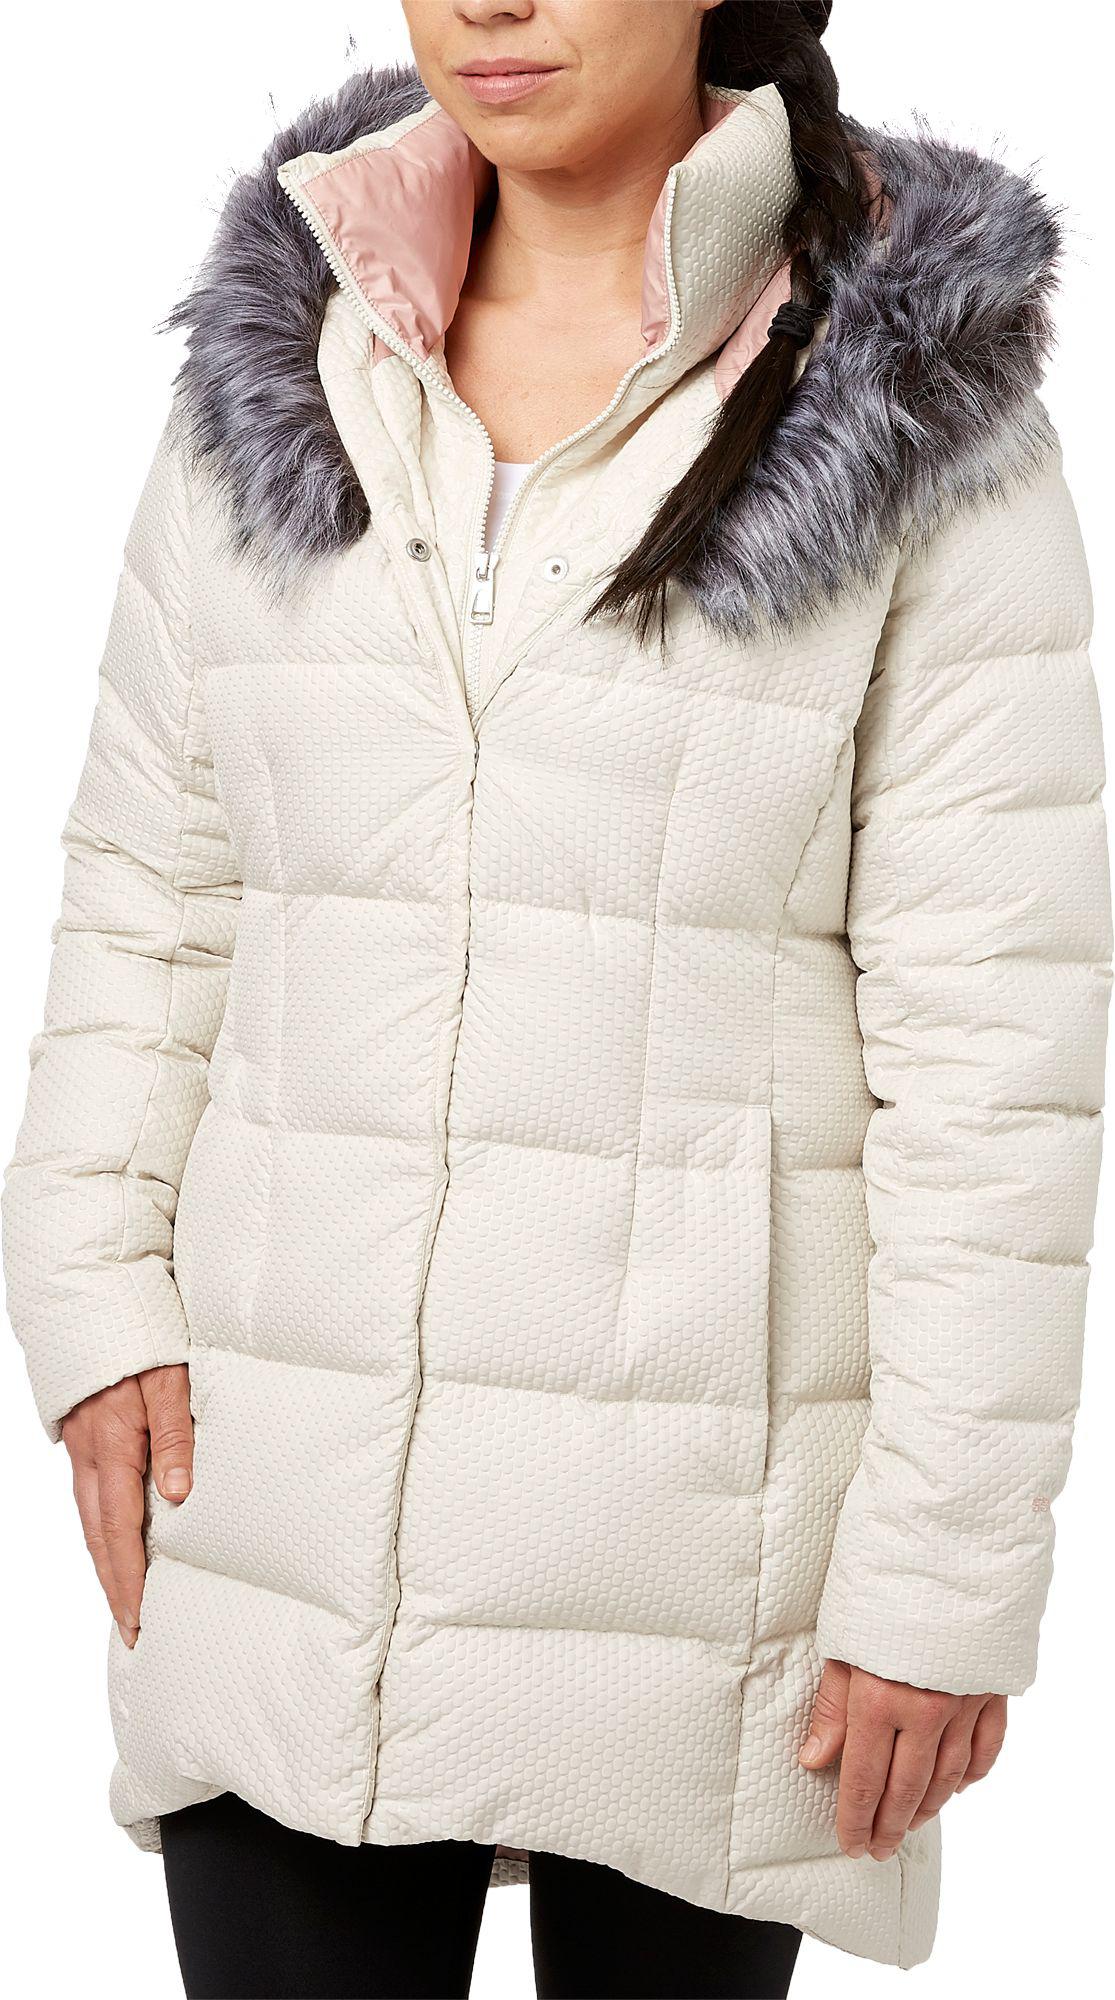 hey mama parka north face Online 